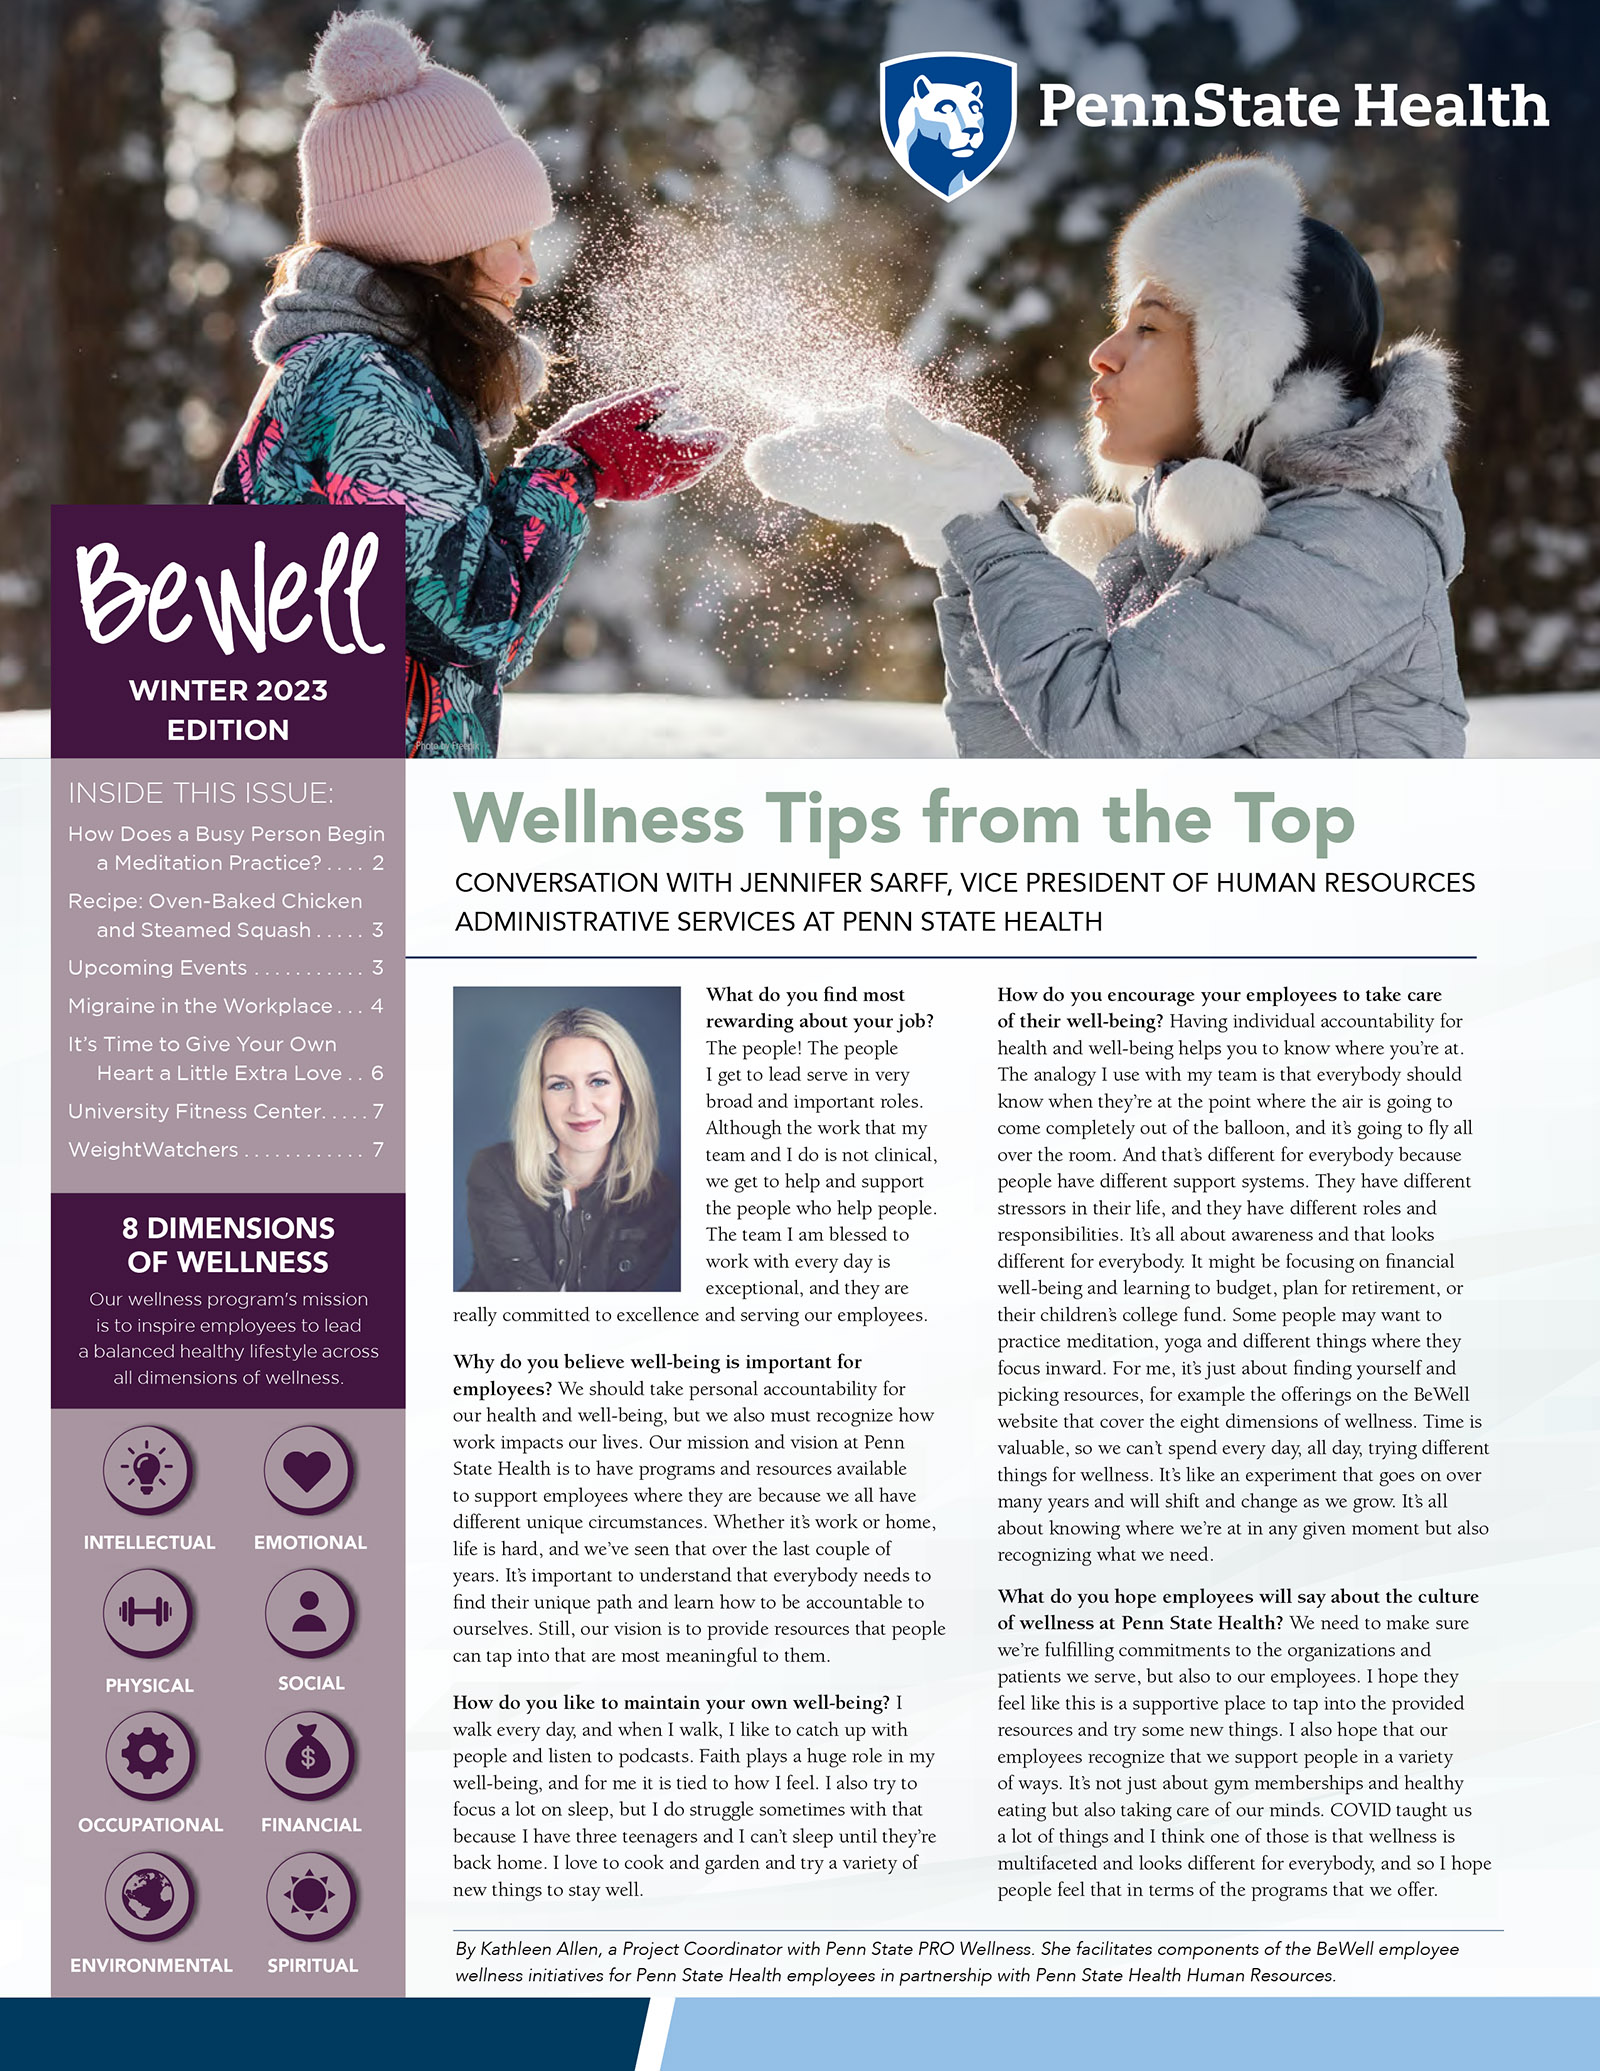 Thumbnail of cover of BeWell Winter 2023 newsletter